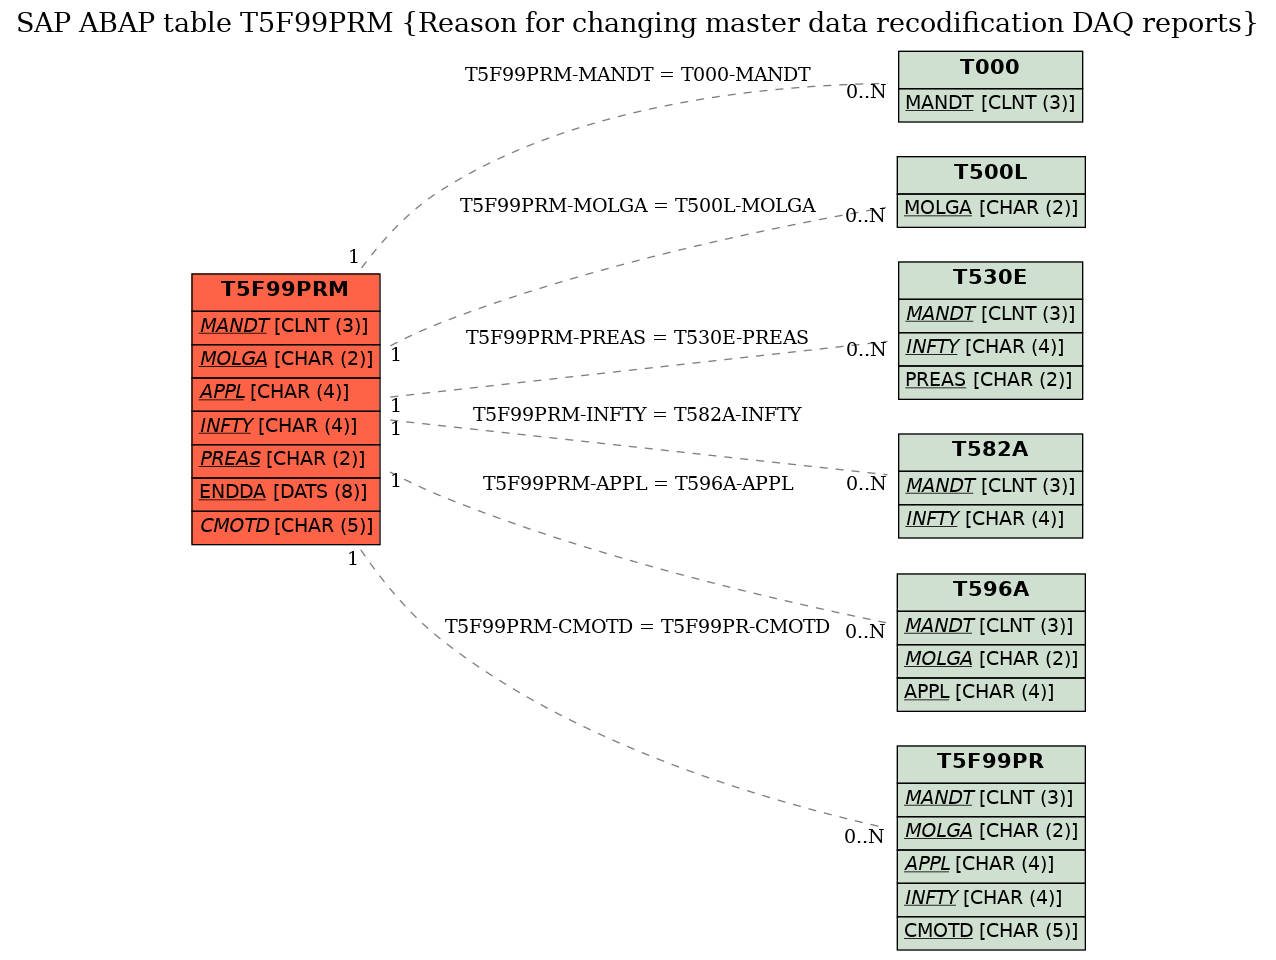 E-R Diagram for table T5F99PRM (Reason for changing master data recodification DAQ reports)